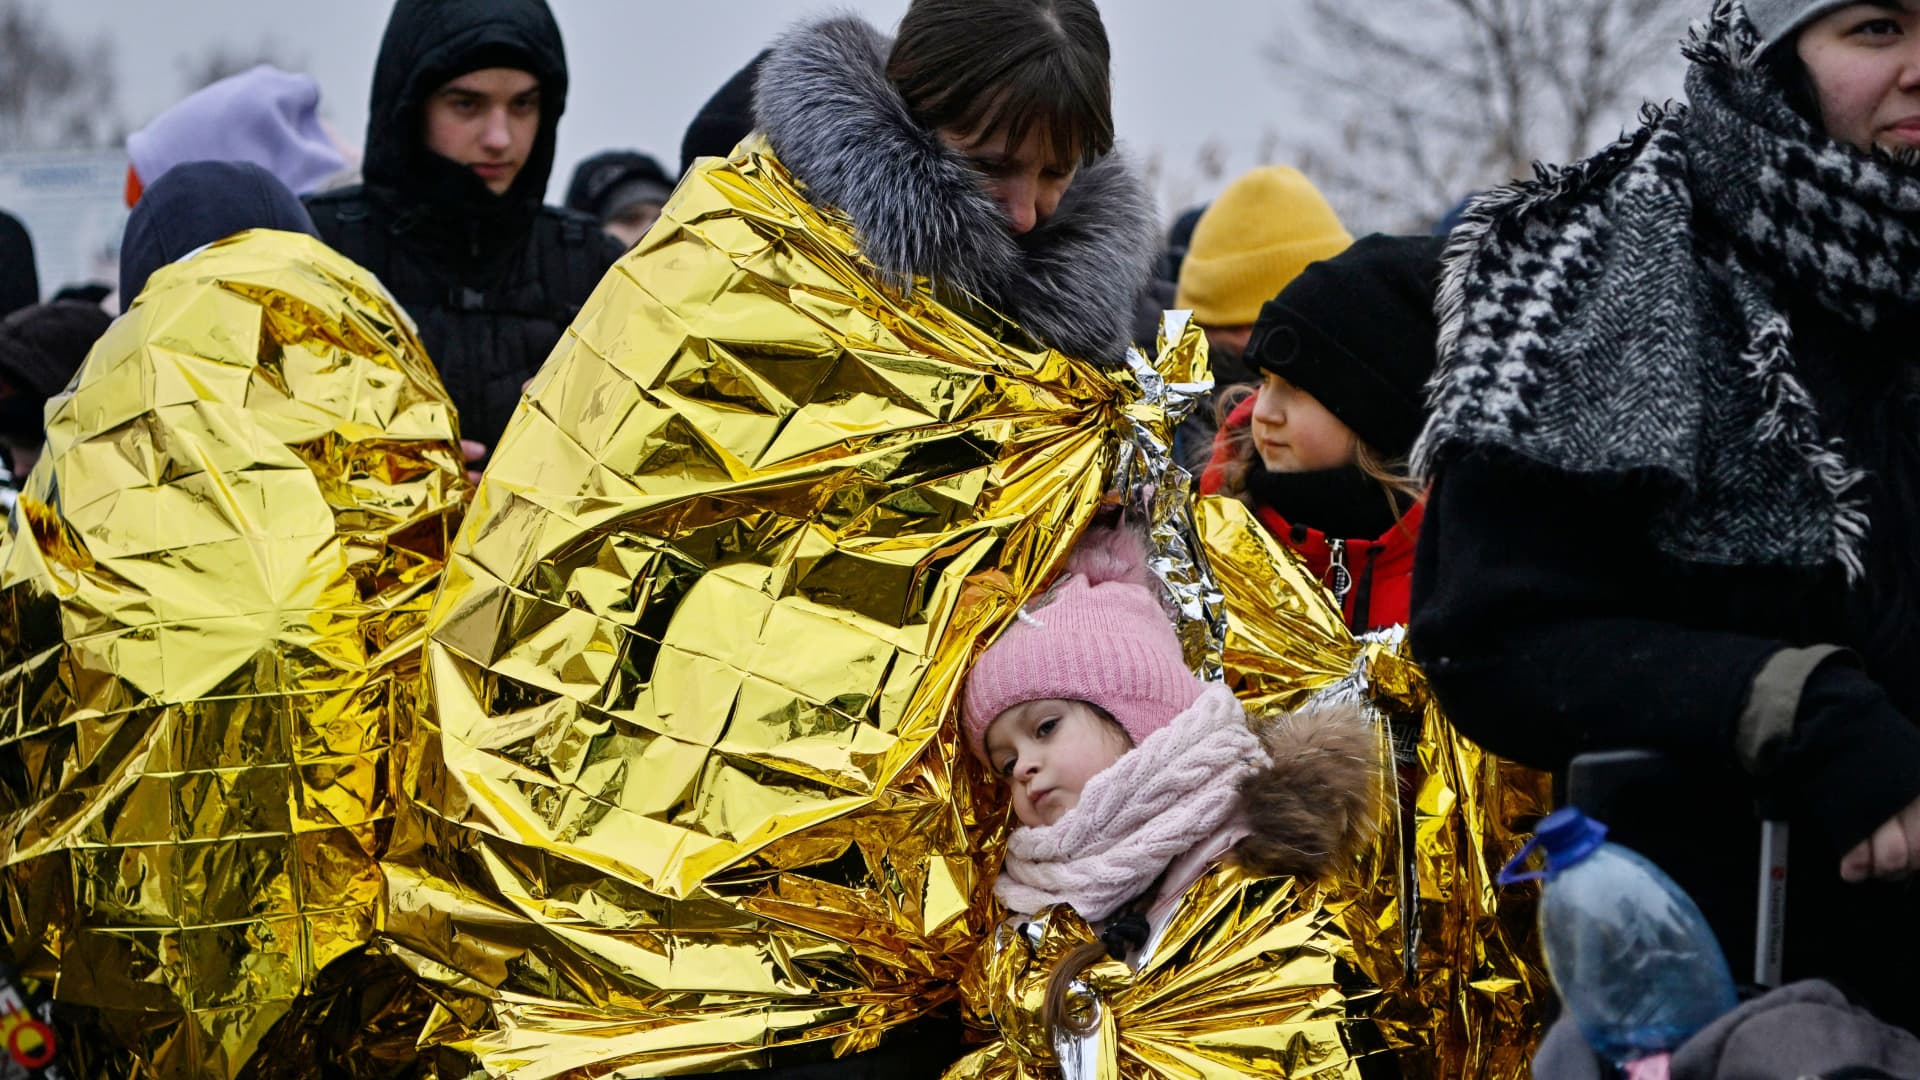 People wait in freezing cold temperatures to be transferred to a train station, after crossing the Ukrainian borders into Poland, at the Medyka border crossing in Poland, on March 7, 2022.